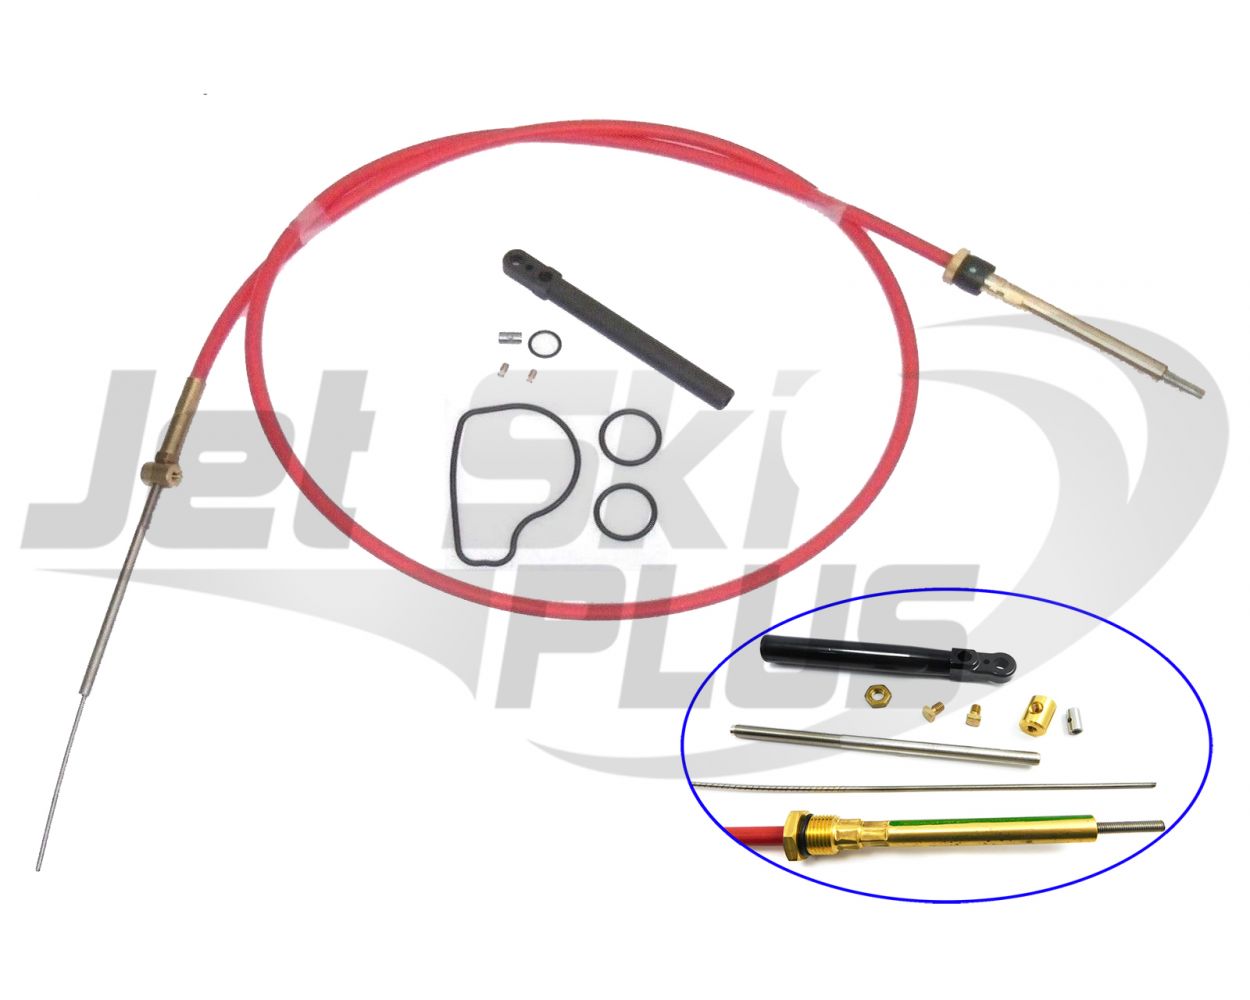 Lower Shift Cable Assembly For OMC Cobra Sterndrive Replaces 987661 High Quality 